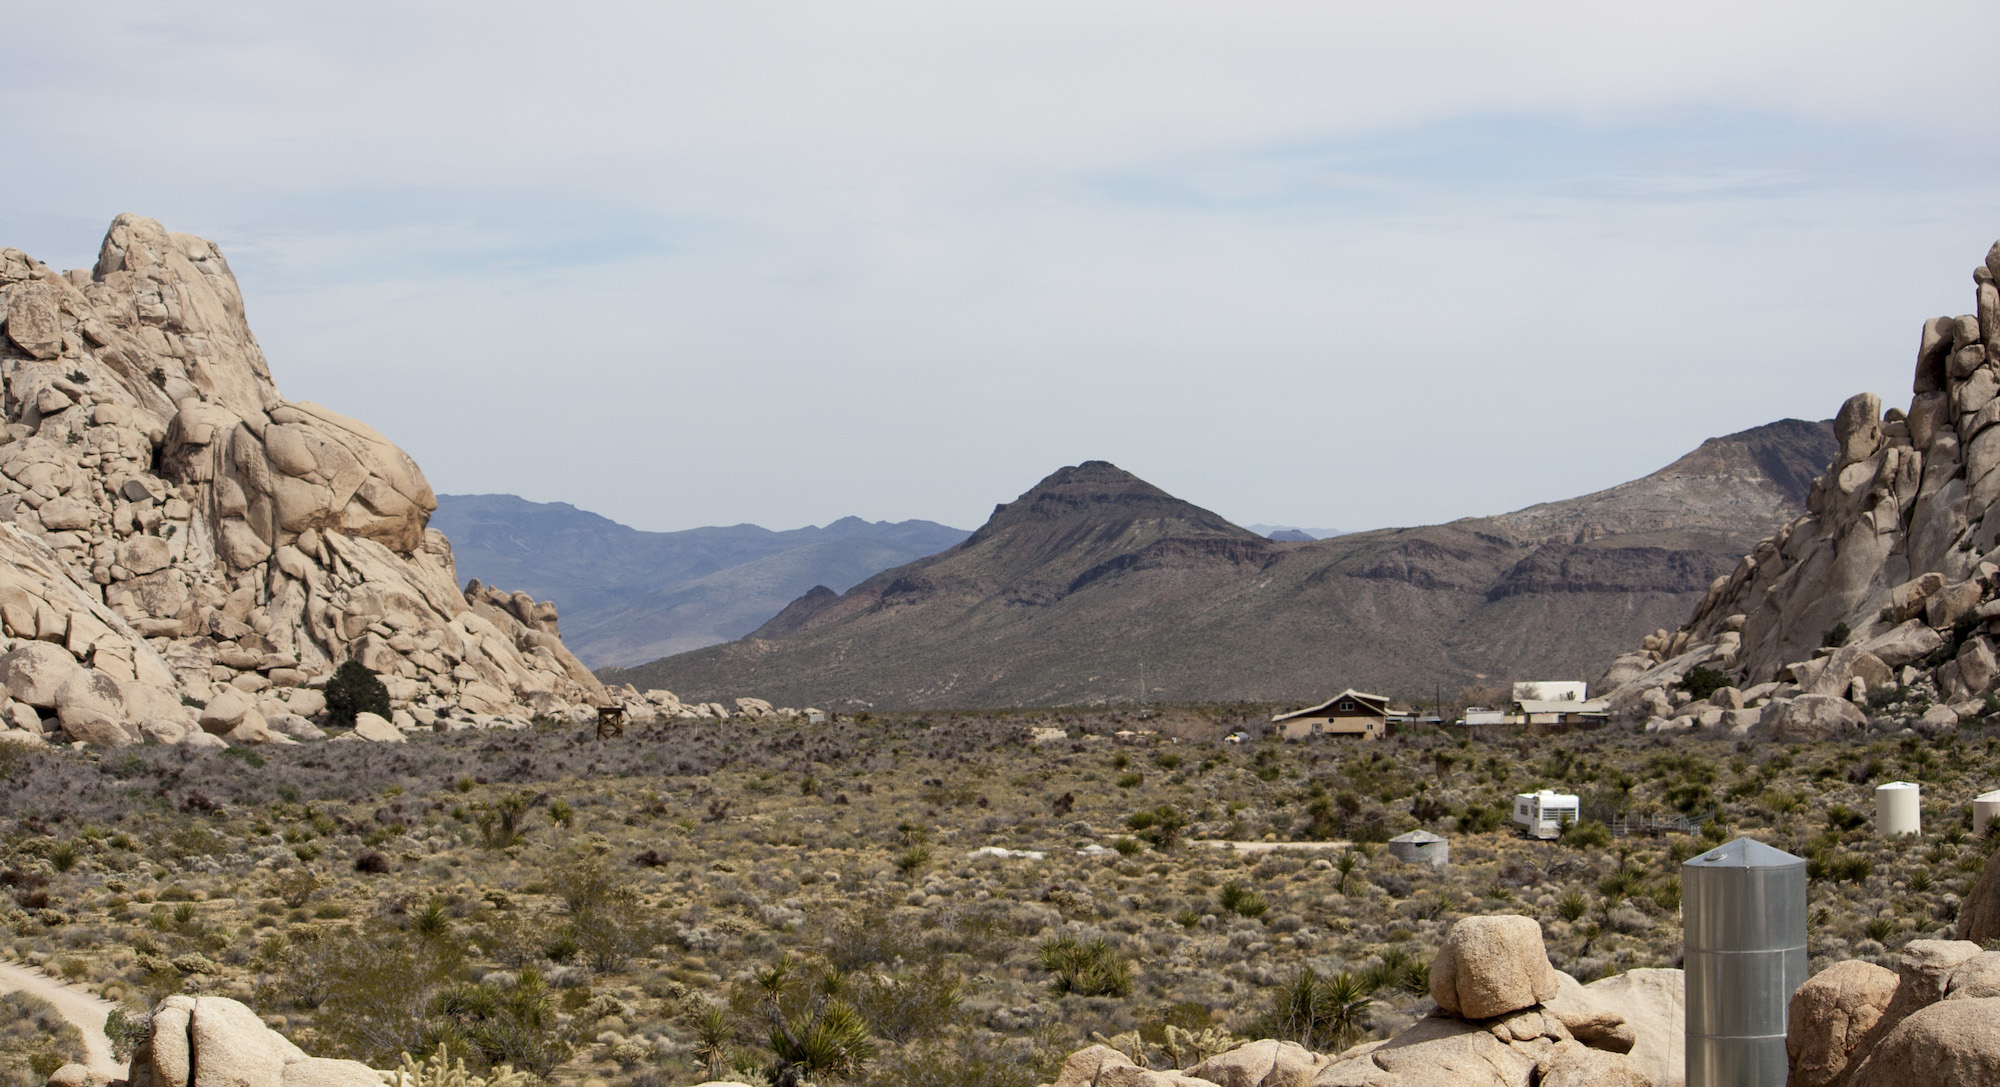 A view of the Sweeny Granite Mountain Desert Center